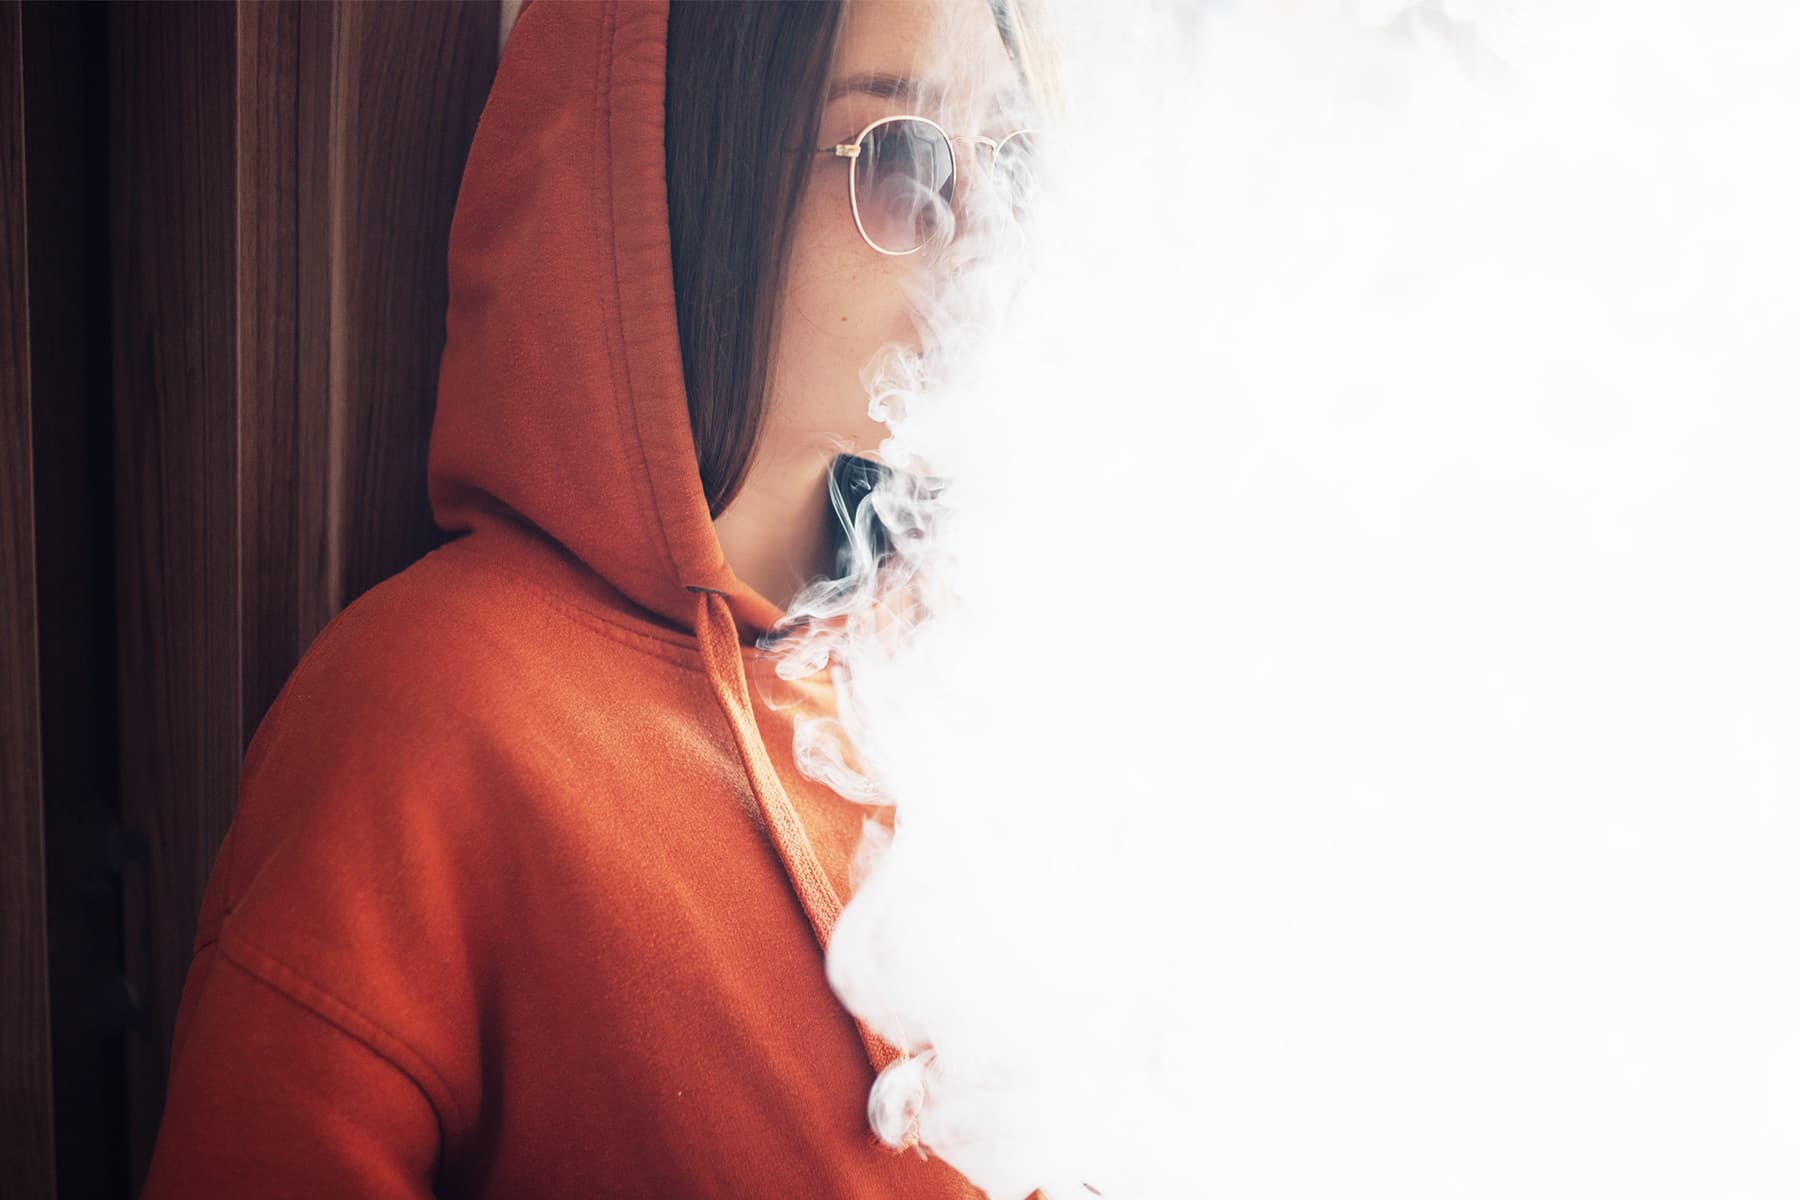 Selection of Youngsters Who Vape Marijuana Doubled in 7 Years